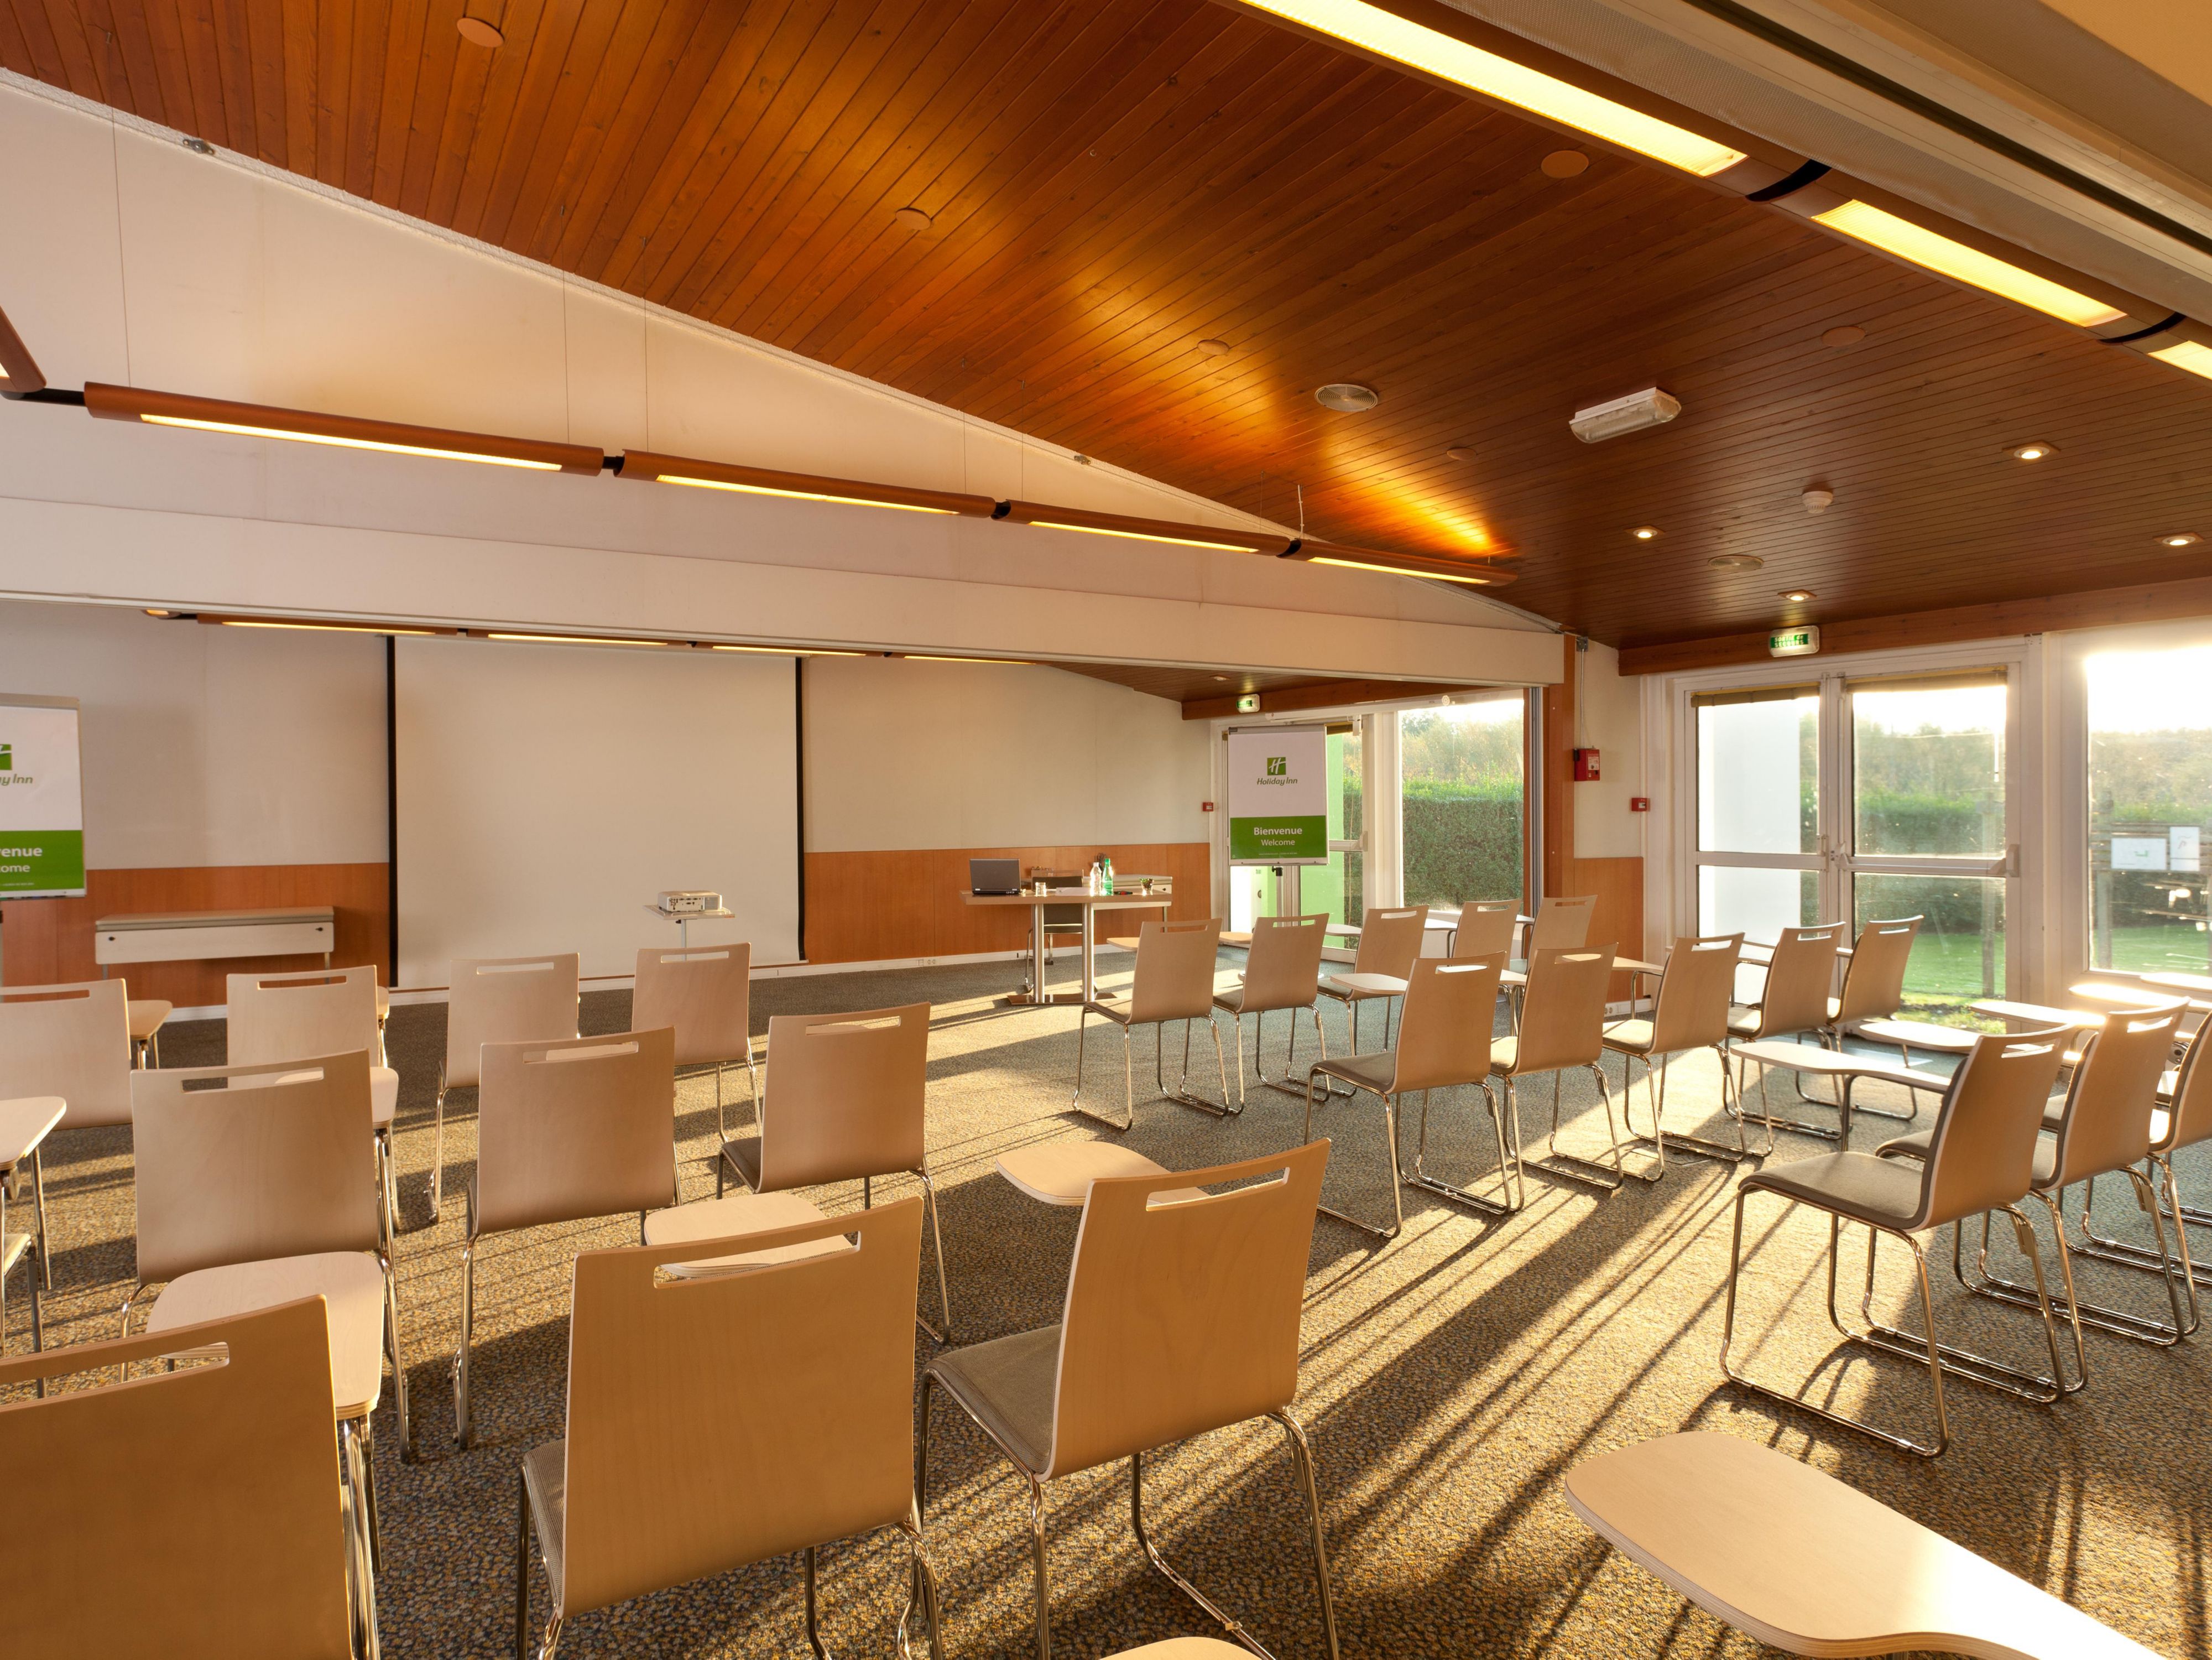 With 336 square meters of flexible meeting space we can host any type of board meeting, social function, seminar with personalized attention. Catering from "Le Jardin d'Englos" , our restaurant, is a tasty bonus.